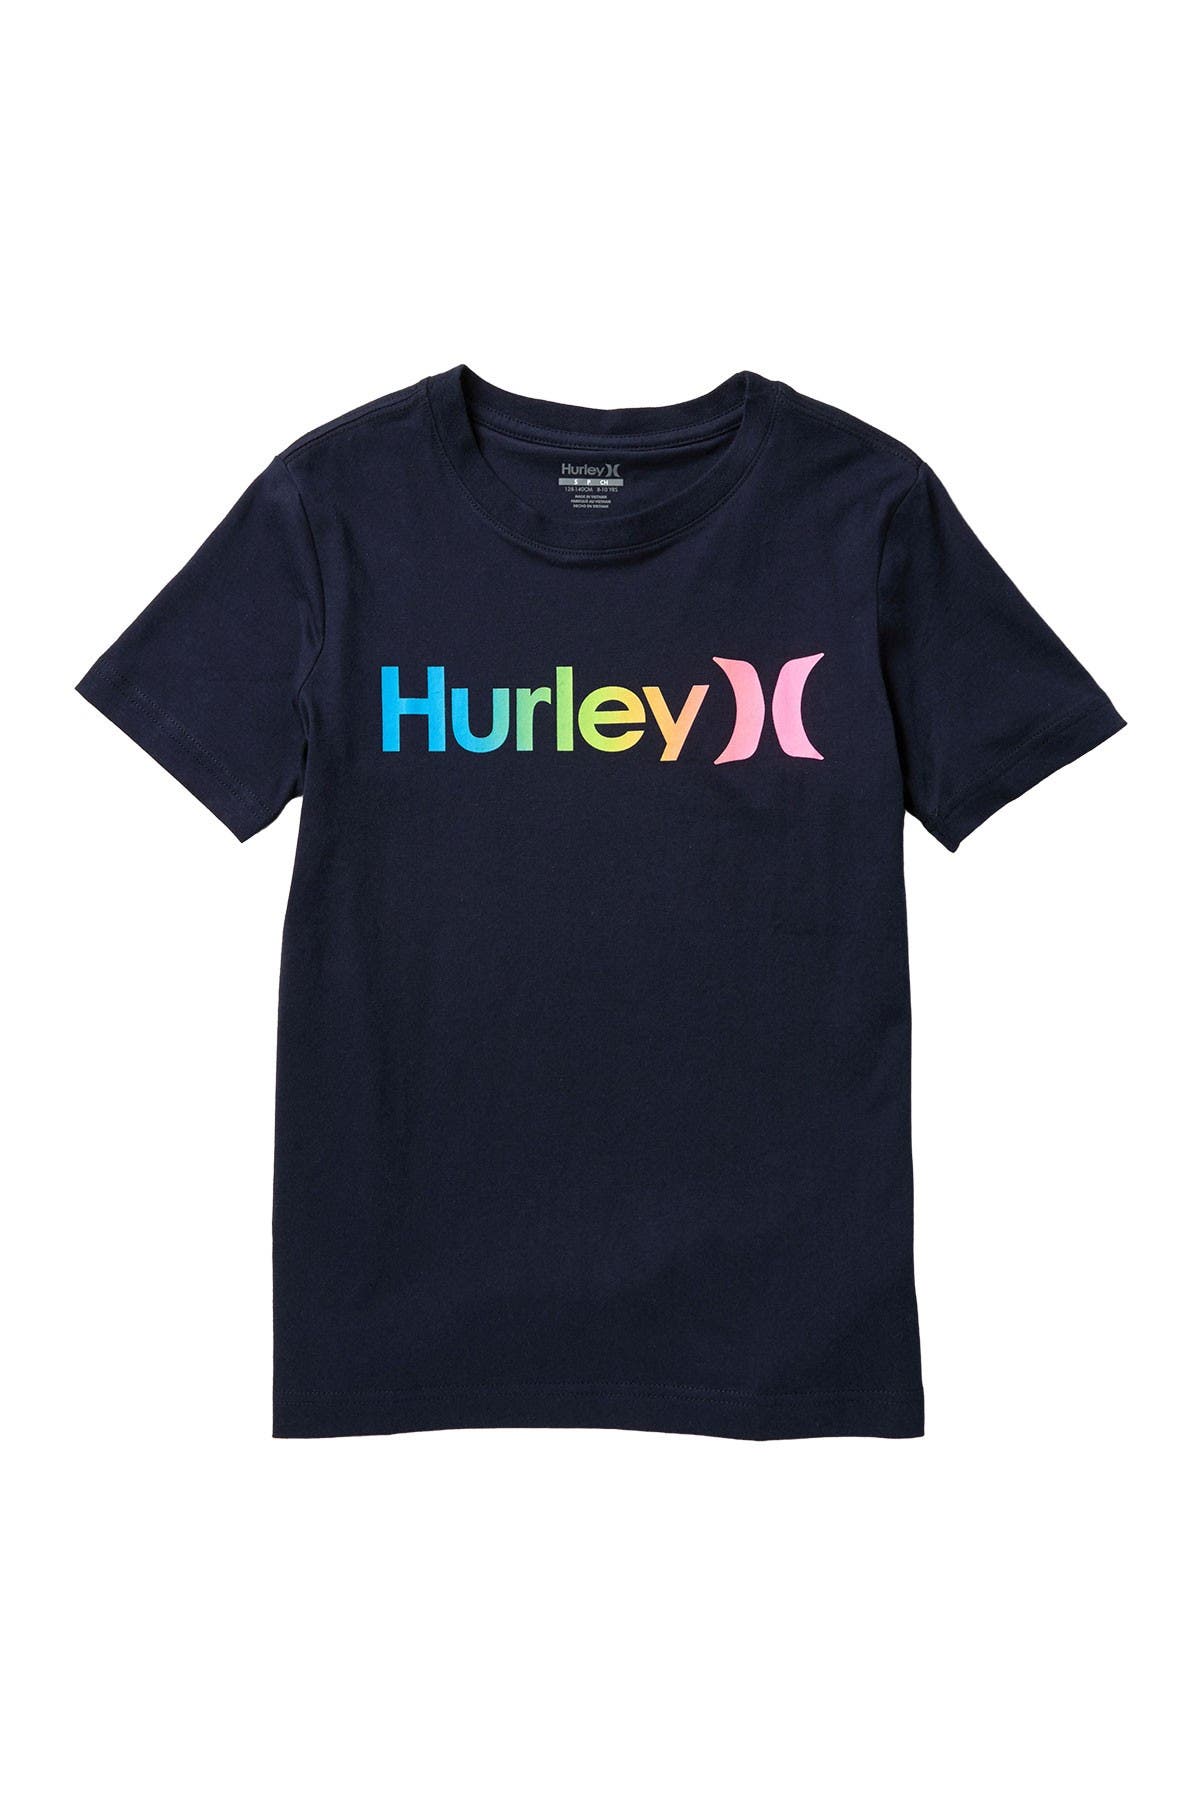 Hurley Kids' One & Only Graphic T-shirt In C6robsidia